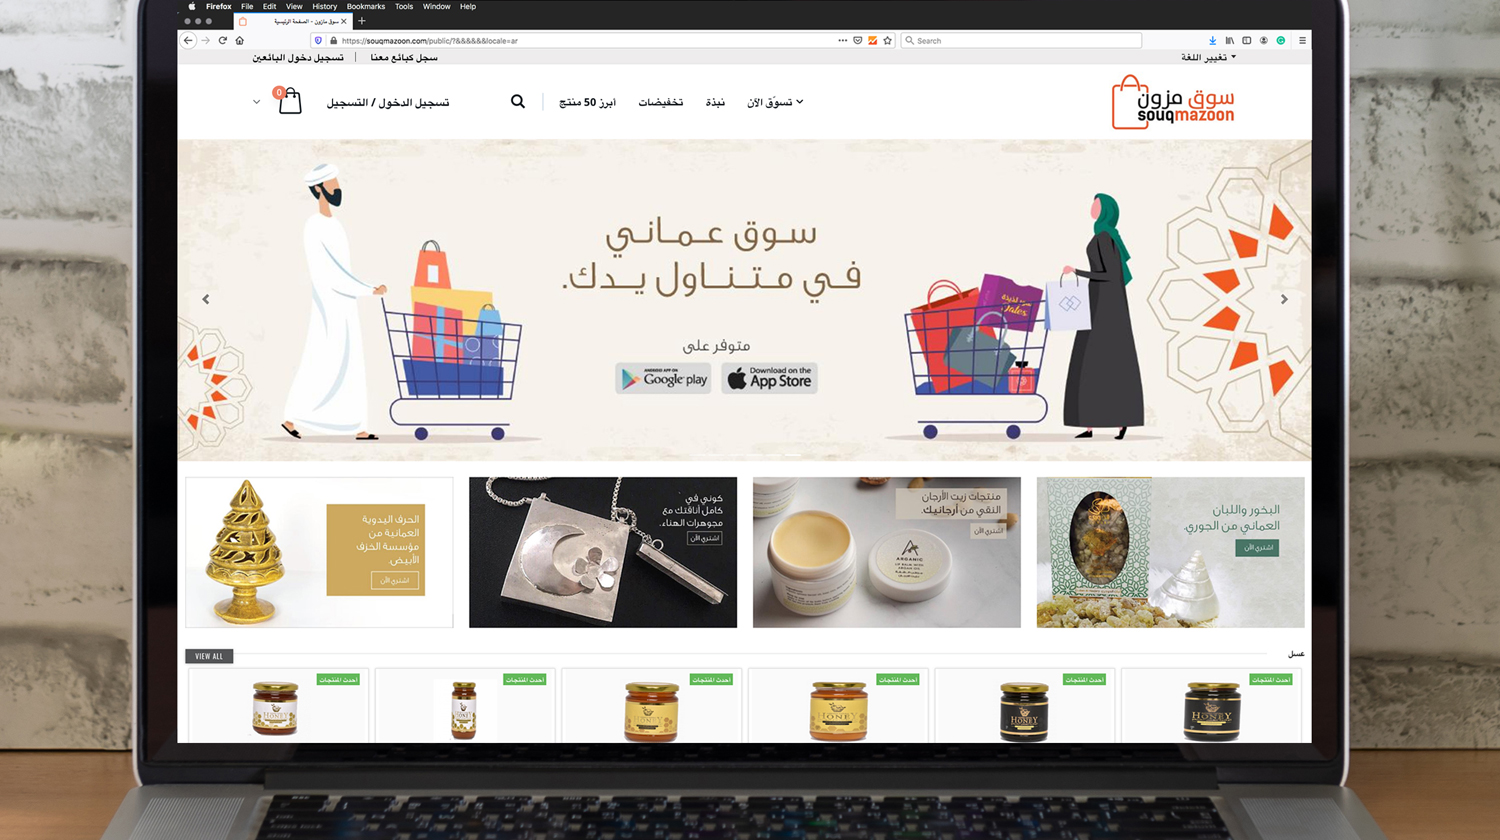 P14-Emarketplace-for-Omani-SMEs-receives-good-response